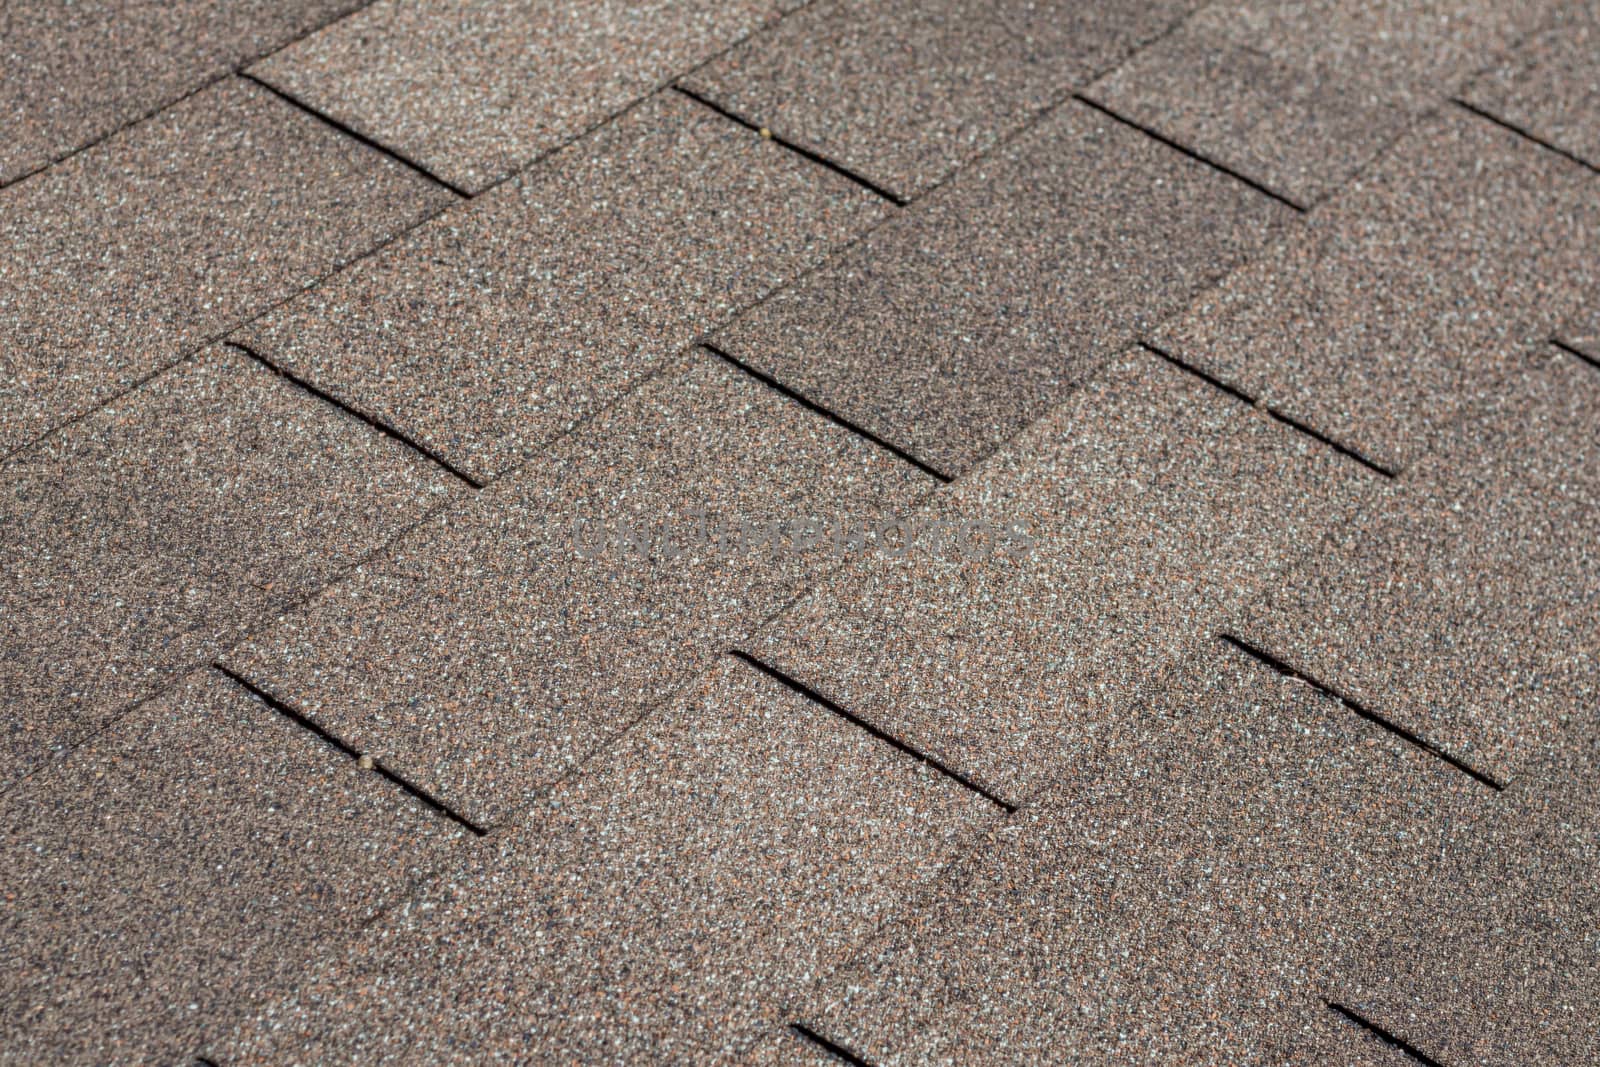 A background image of shingles on a house roof showing their texture, pattern and brown color.